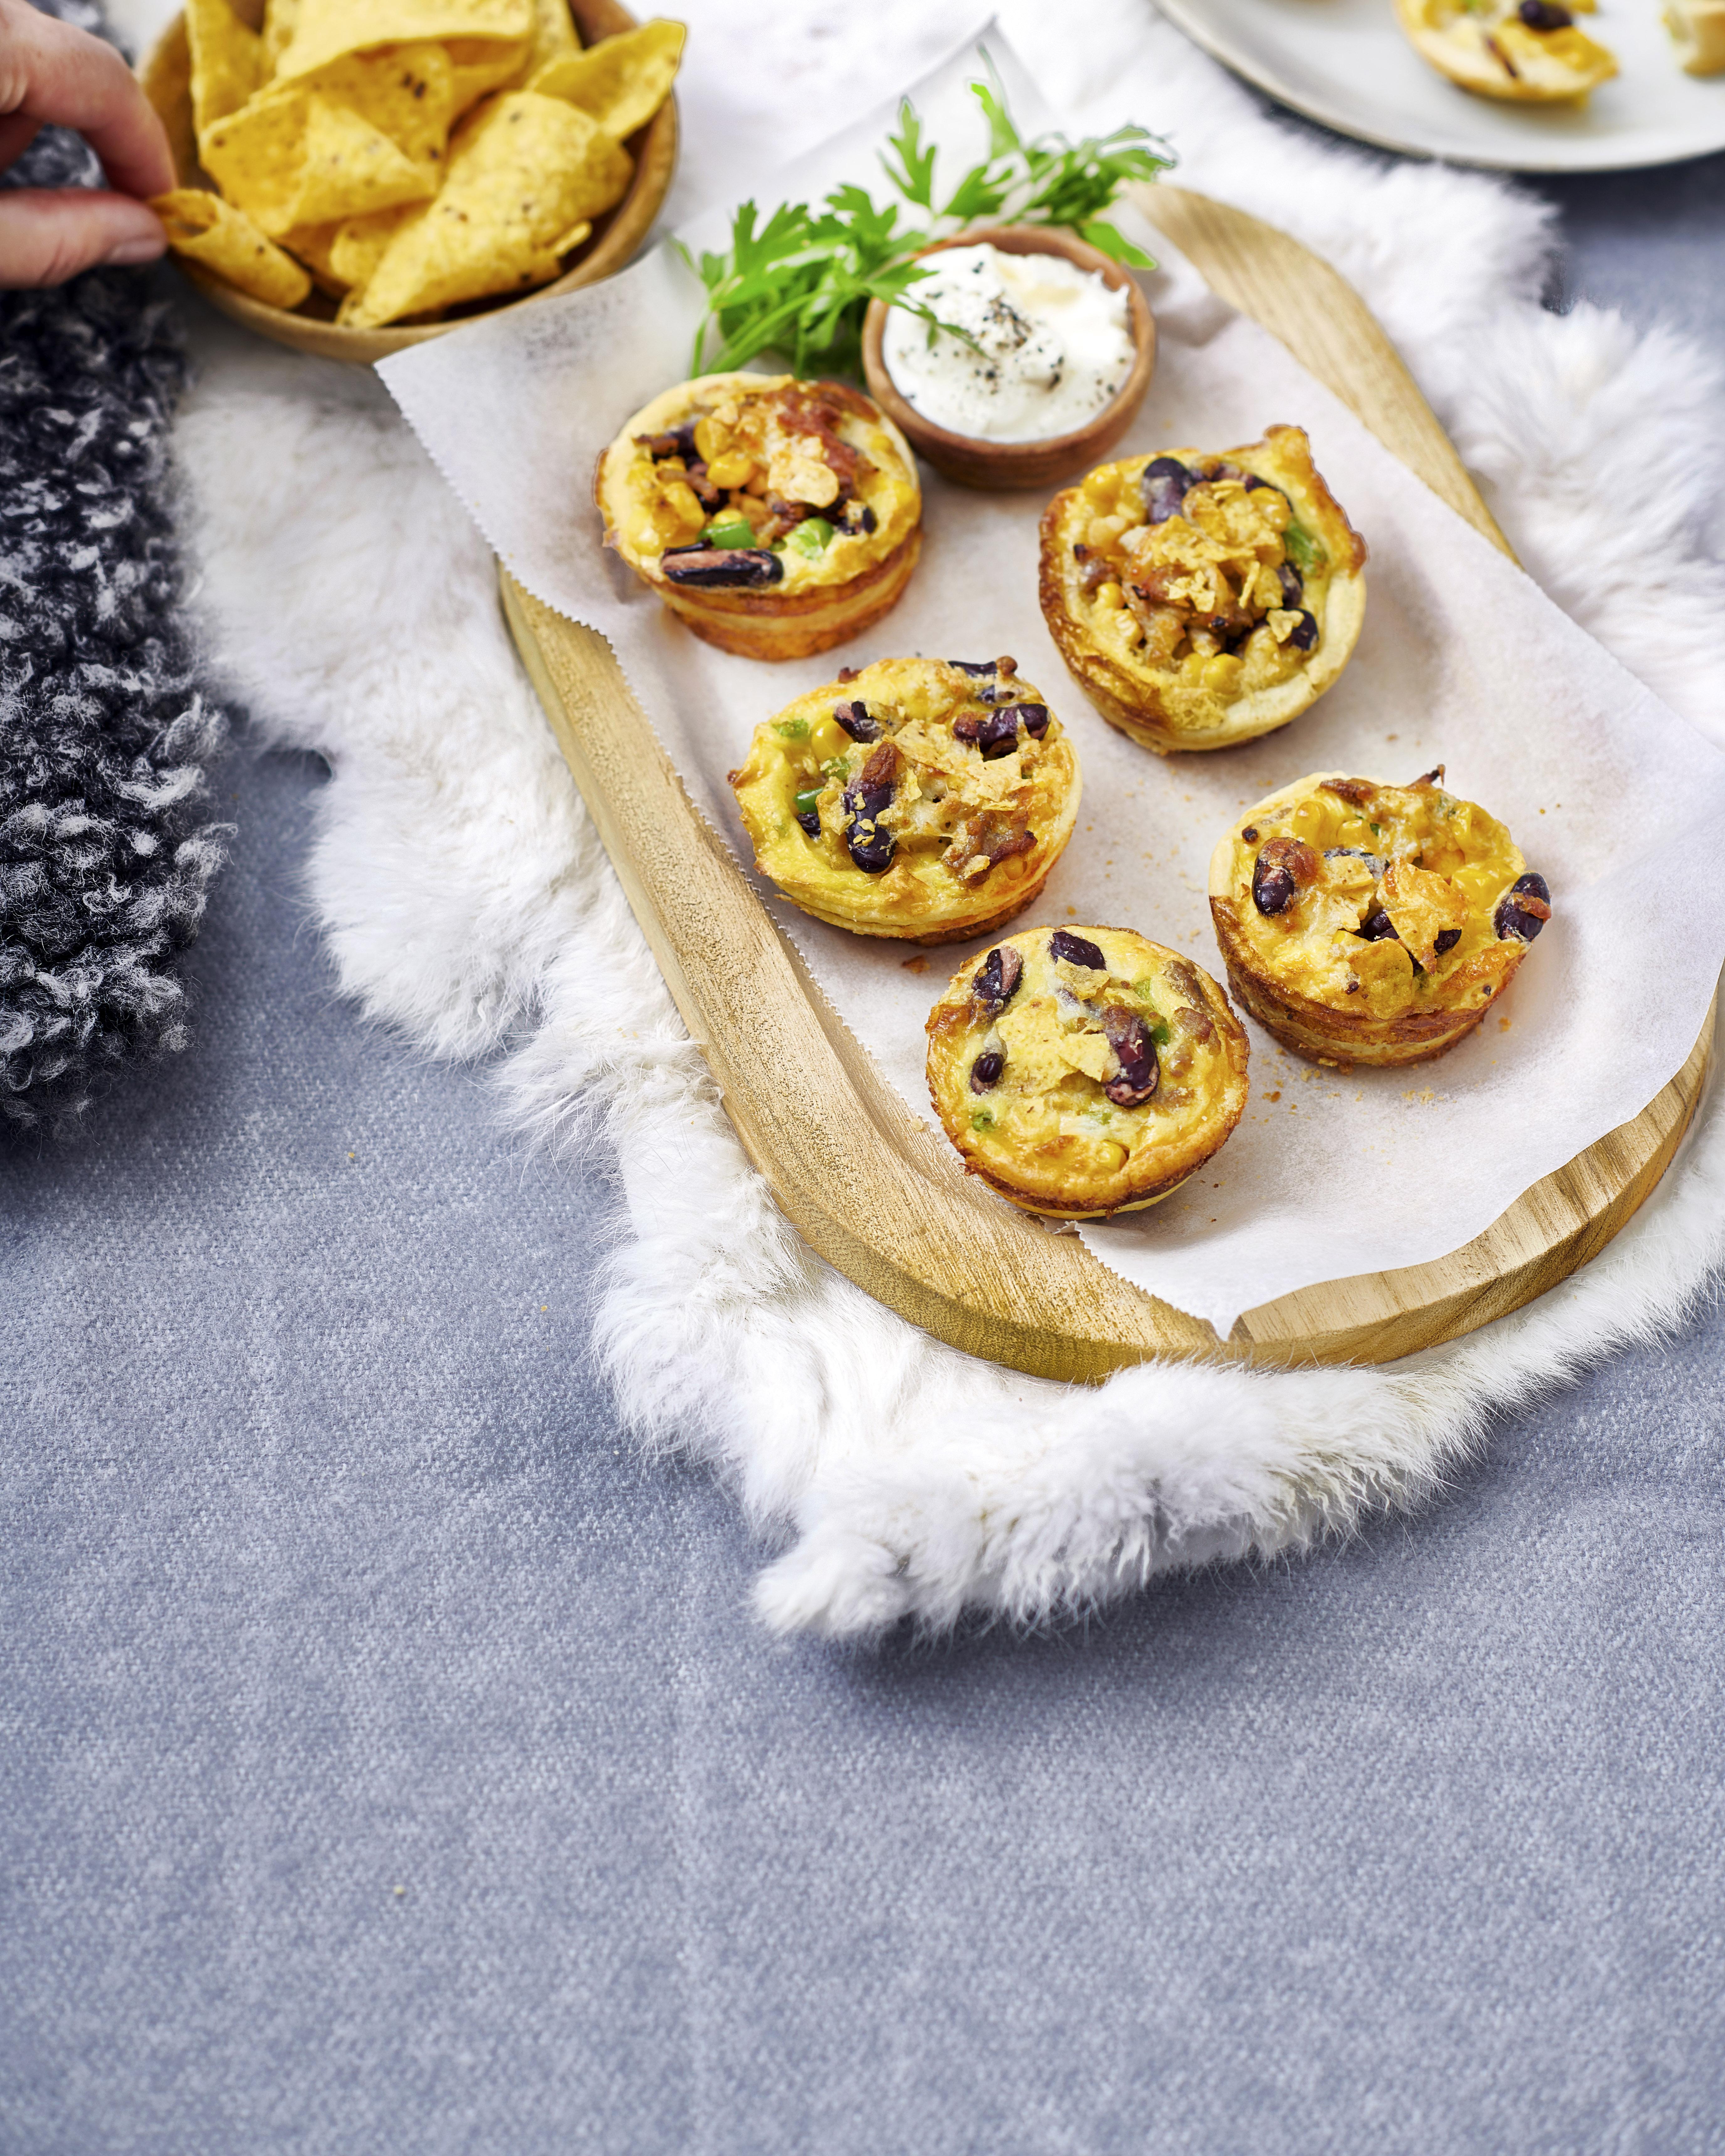 Mexicaanse cupquiches